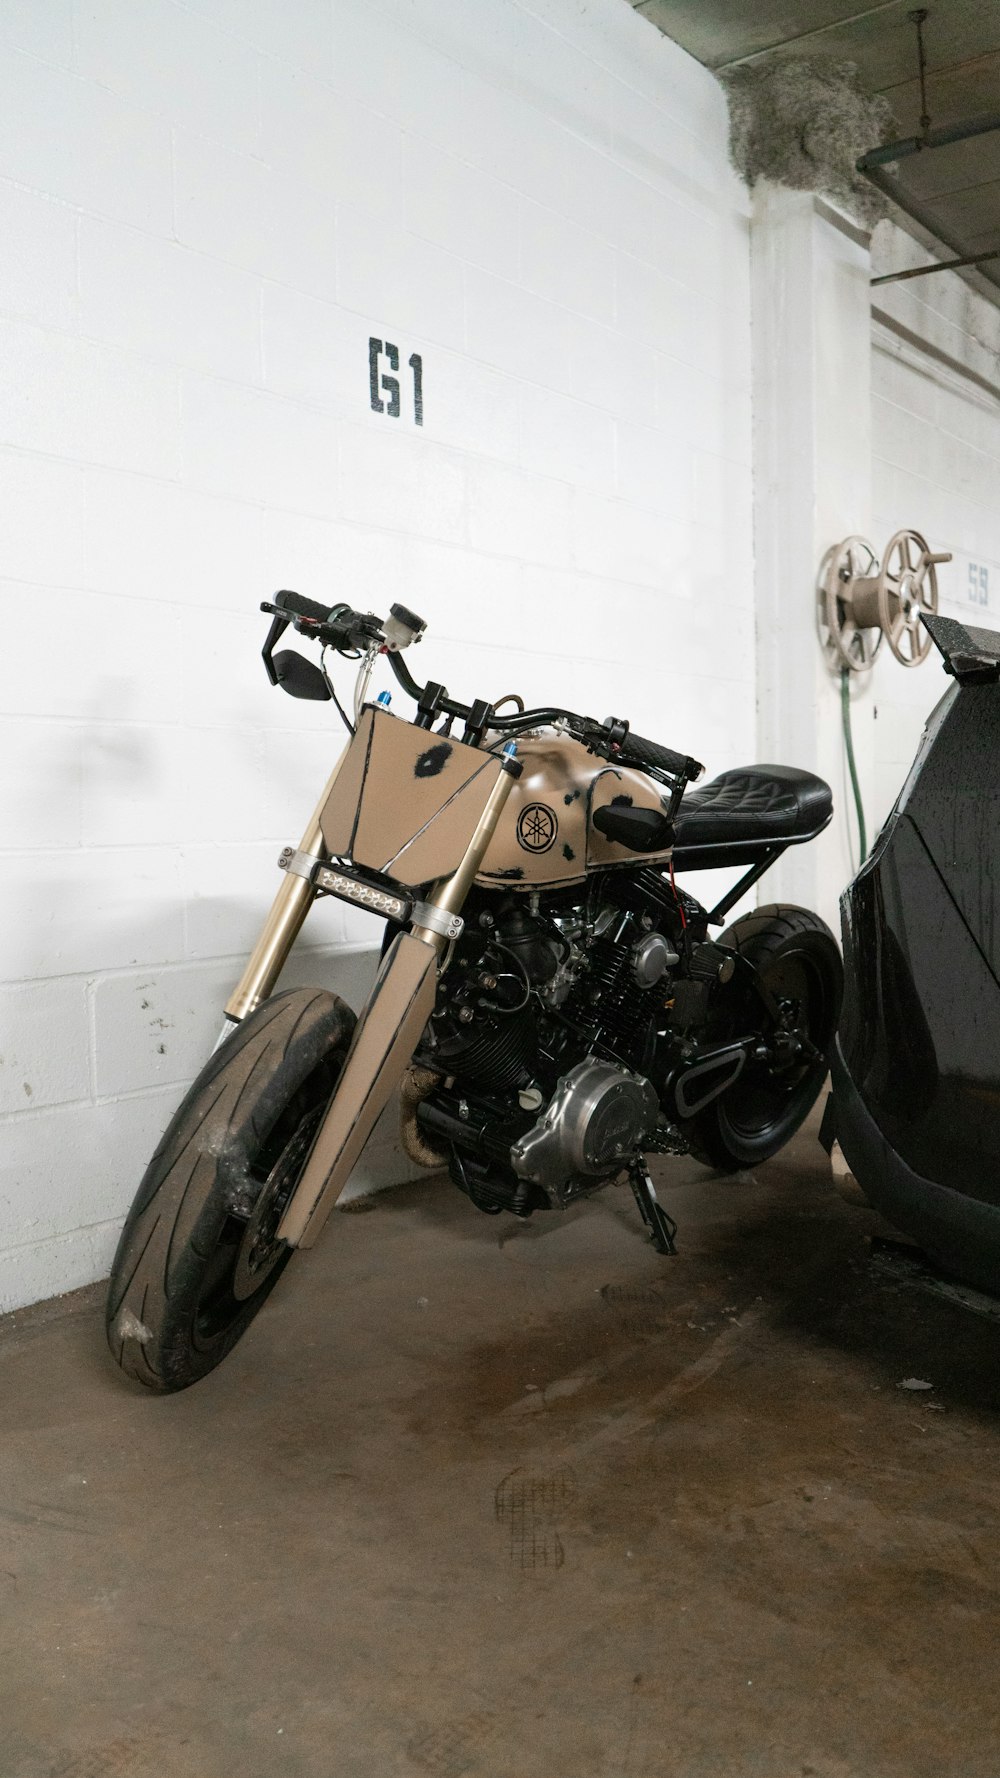 a motorcycle in a garage